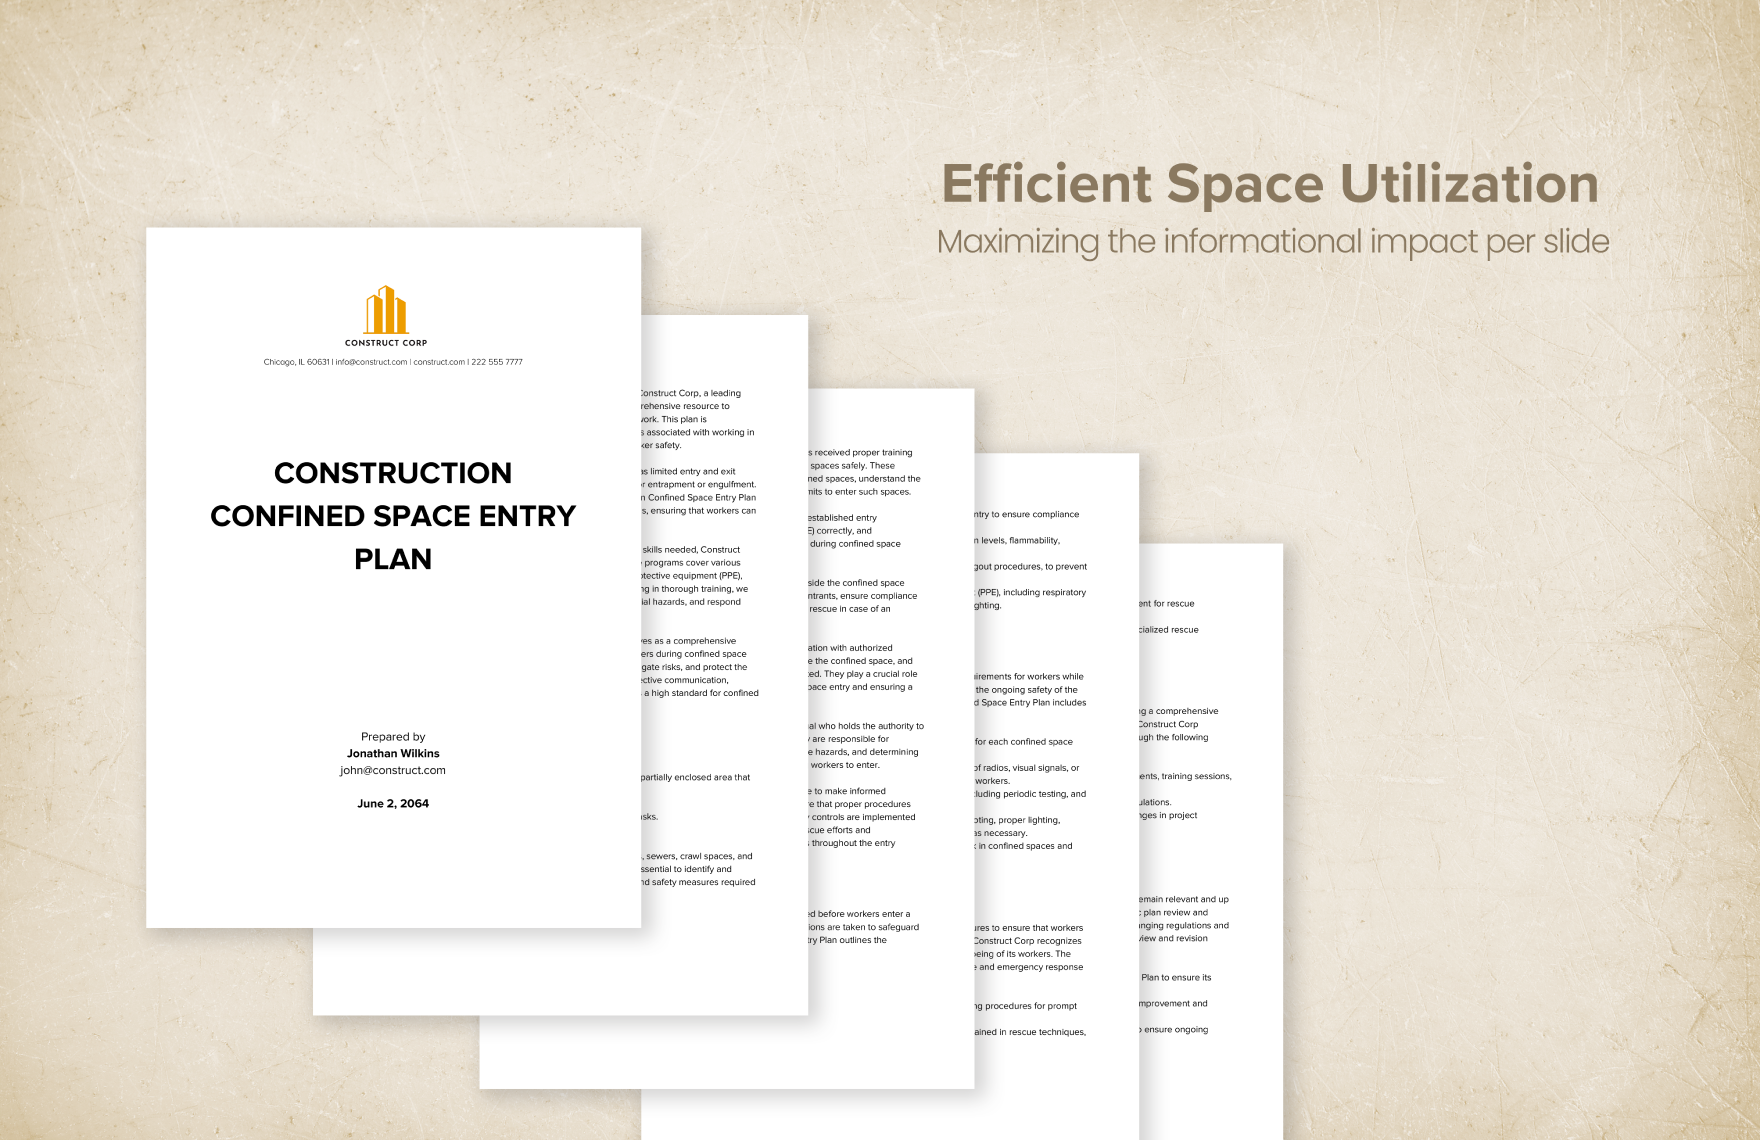 Construction Confined Space Entry Plan Template